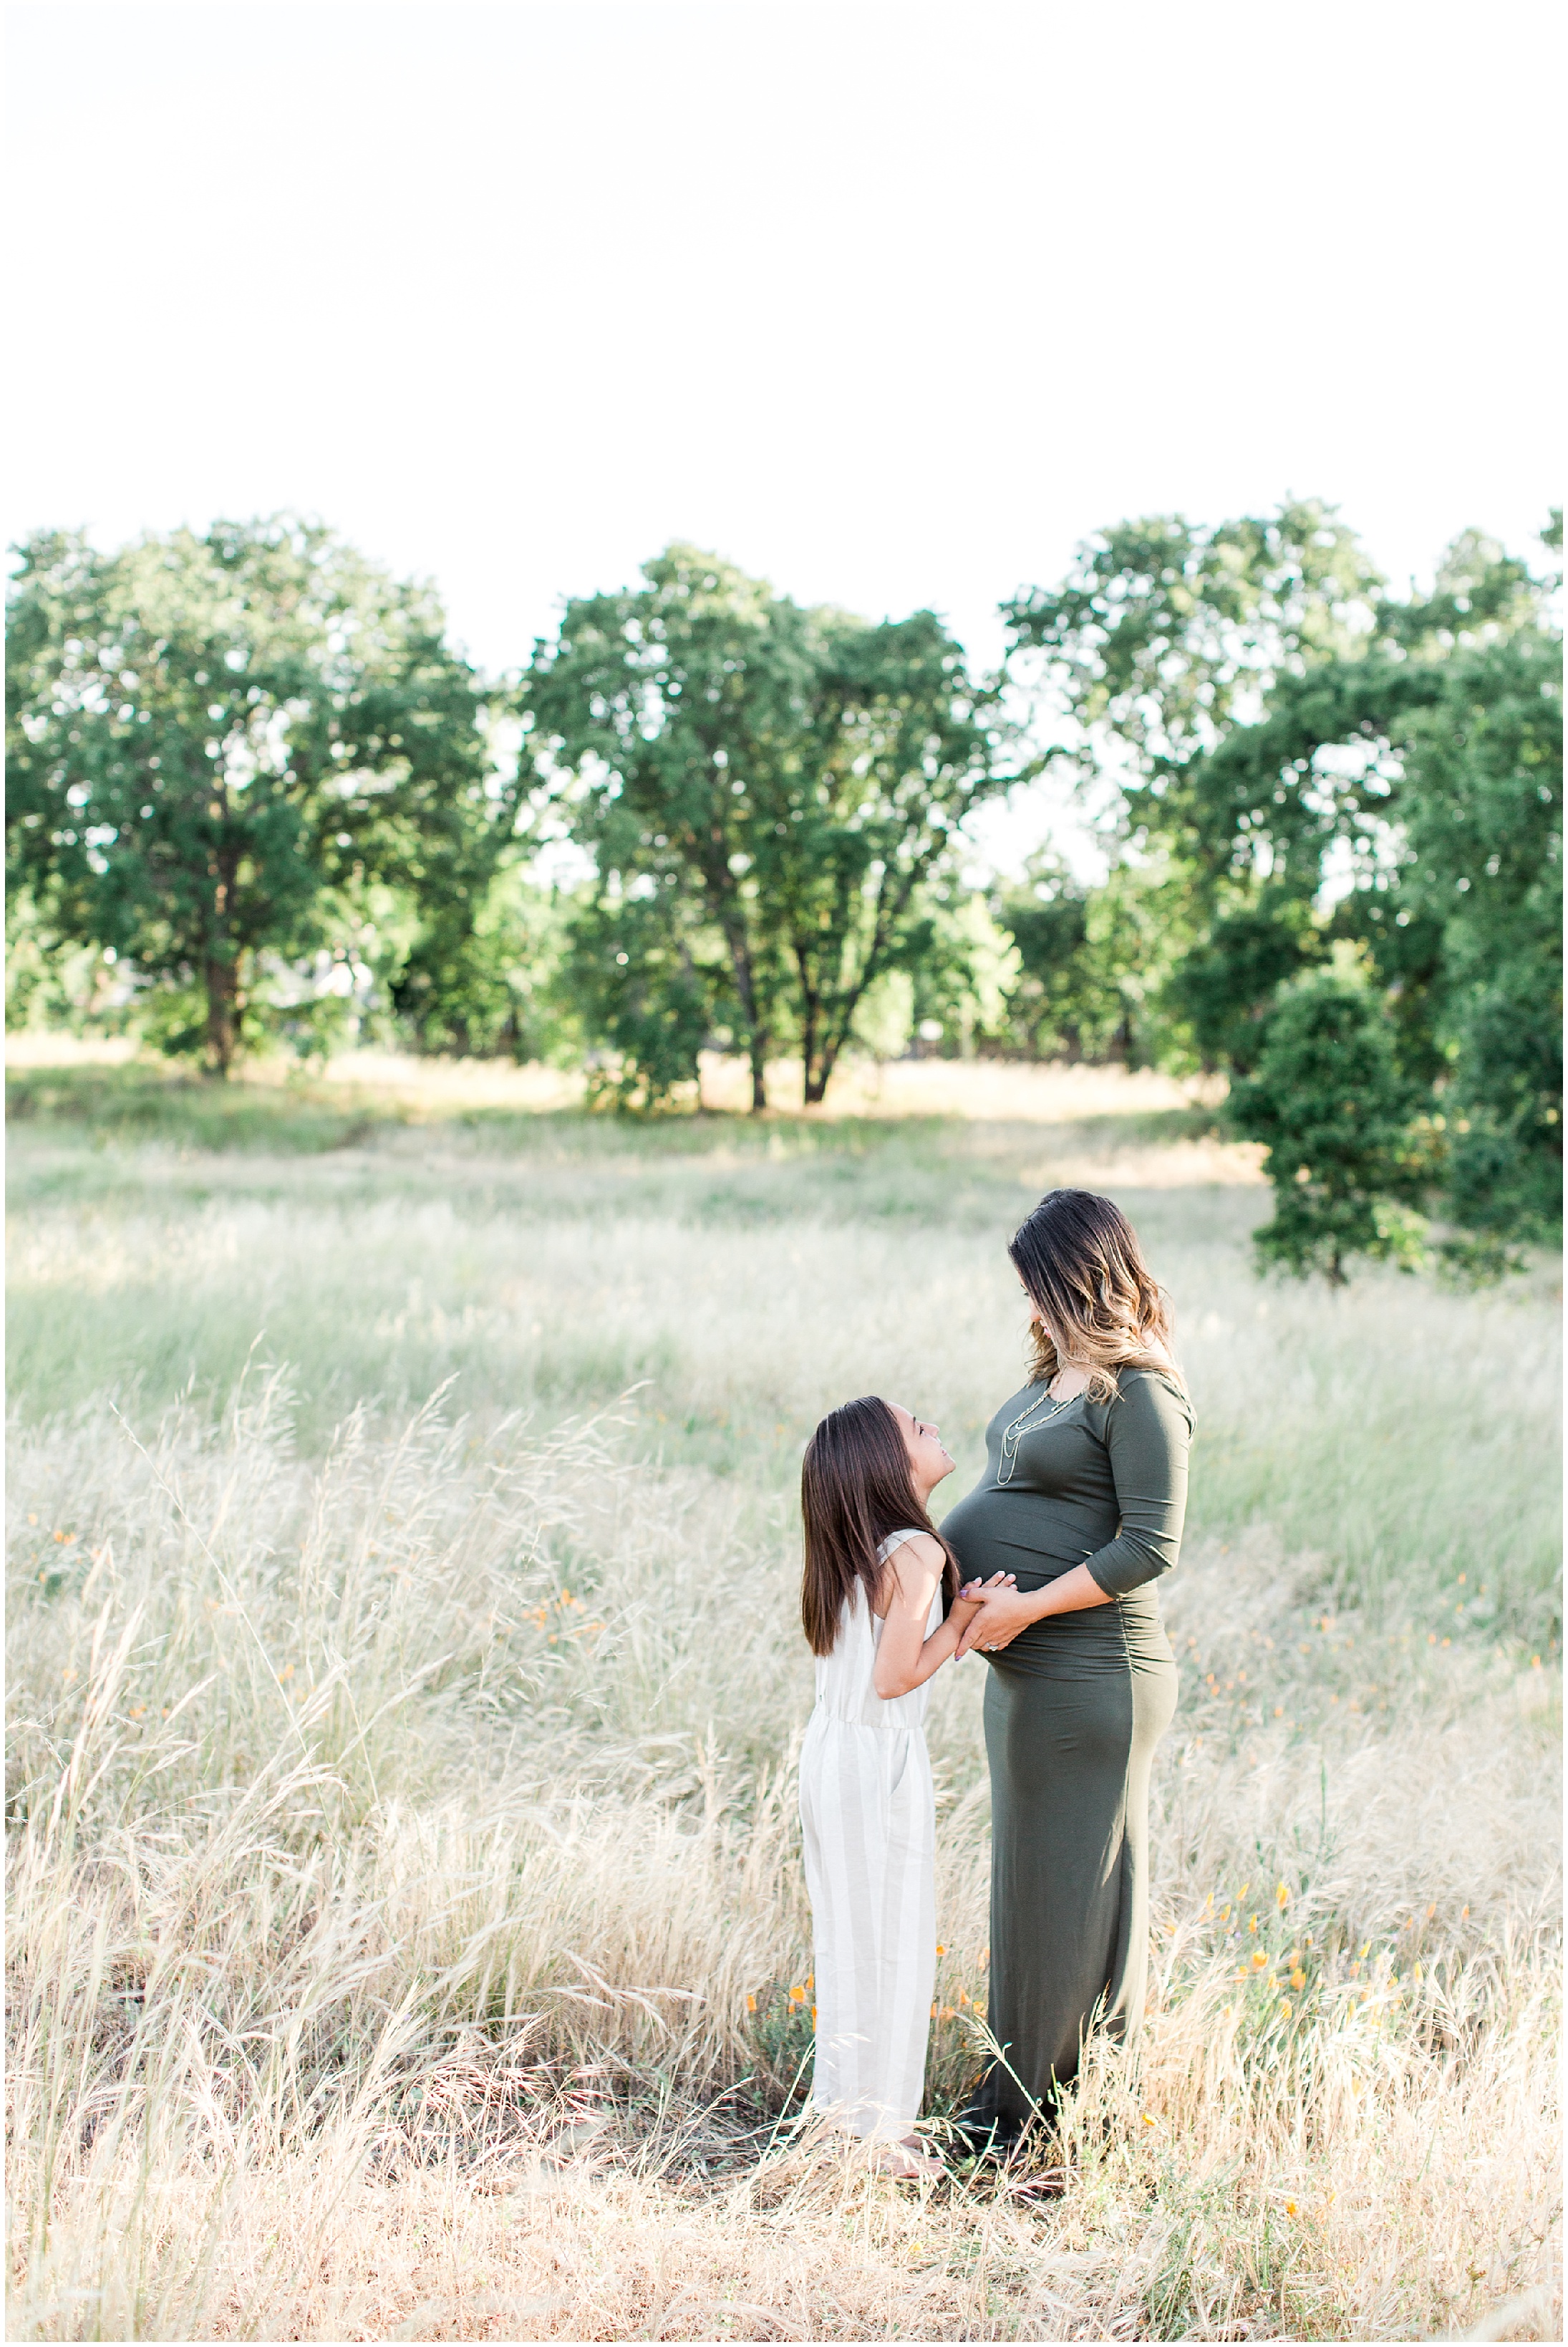 Grassy Fields Maternity Pictures with Daughter